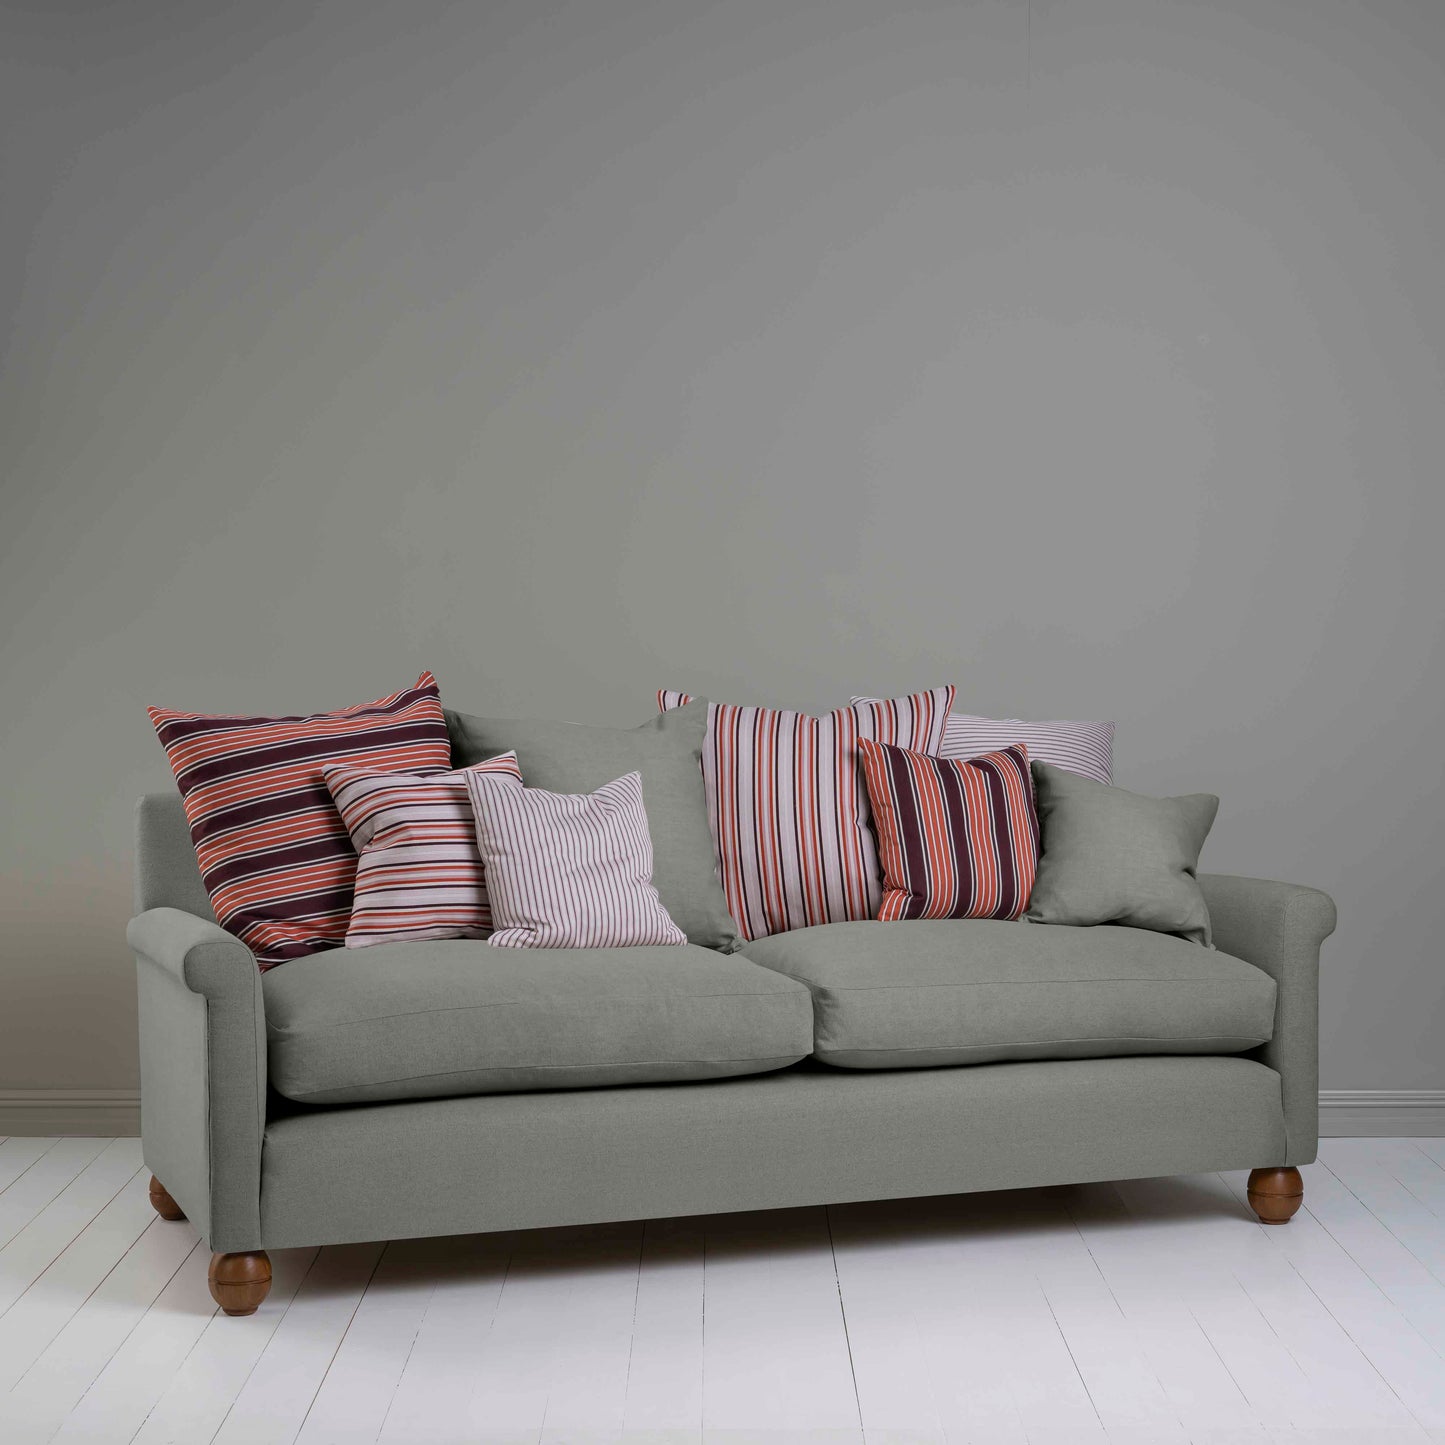 Idler 4 seater sofa in Laidback Linen Shadow